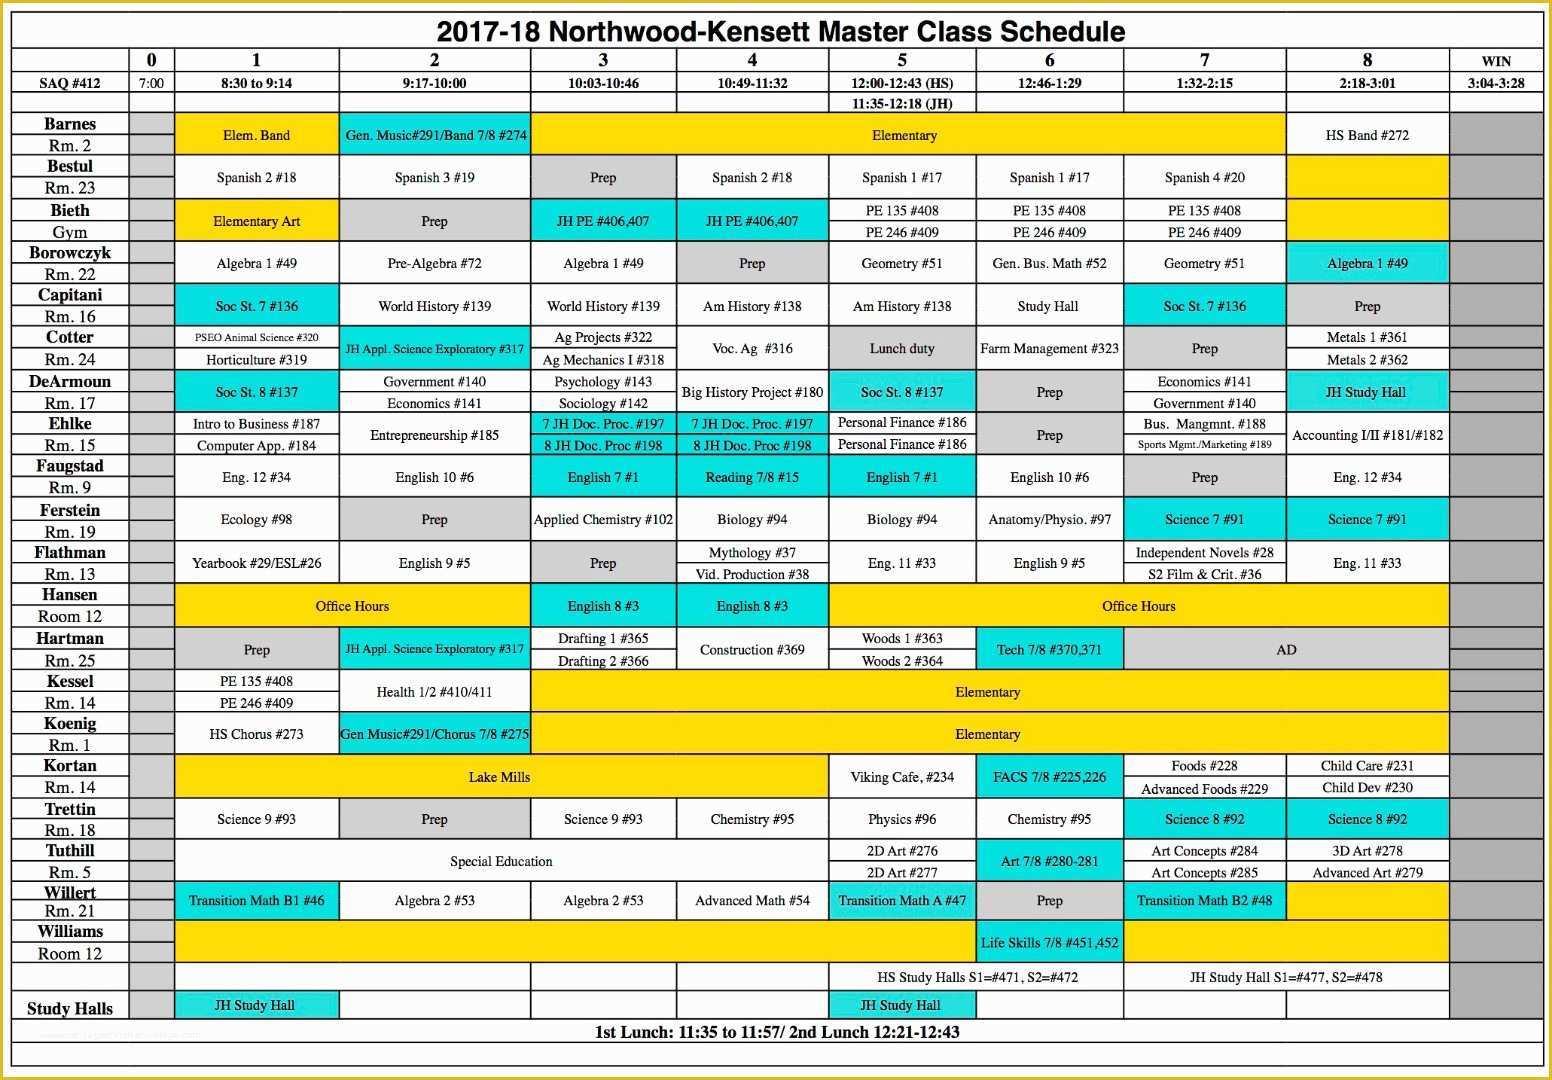 Free School Master Schedule Template Of northwood Kensett 2017 2018 Course Book and Schedule